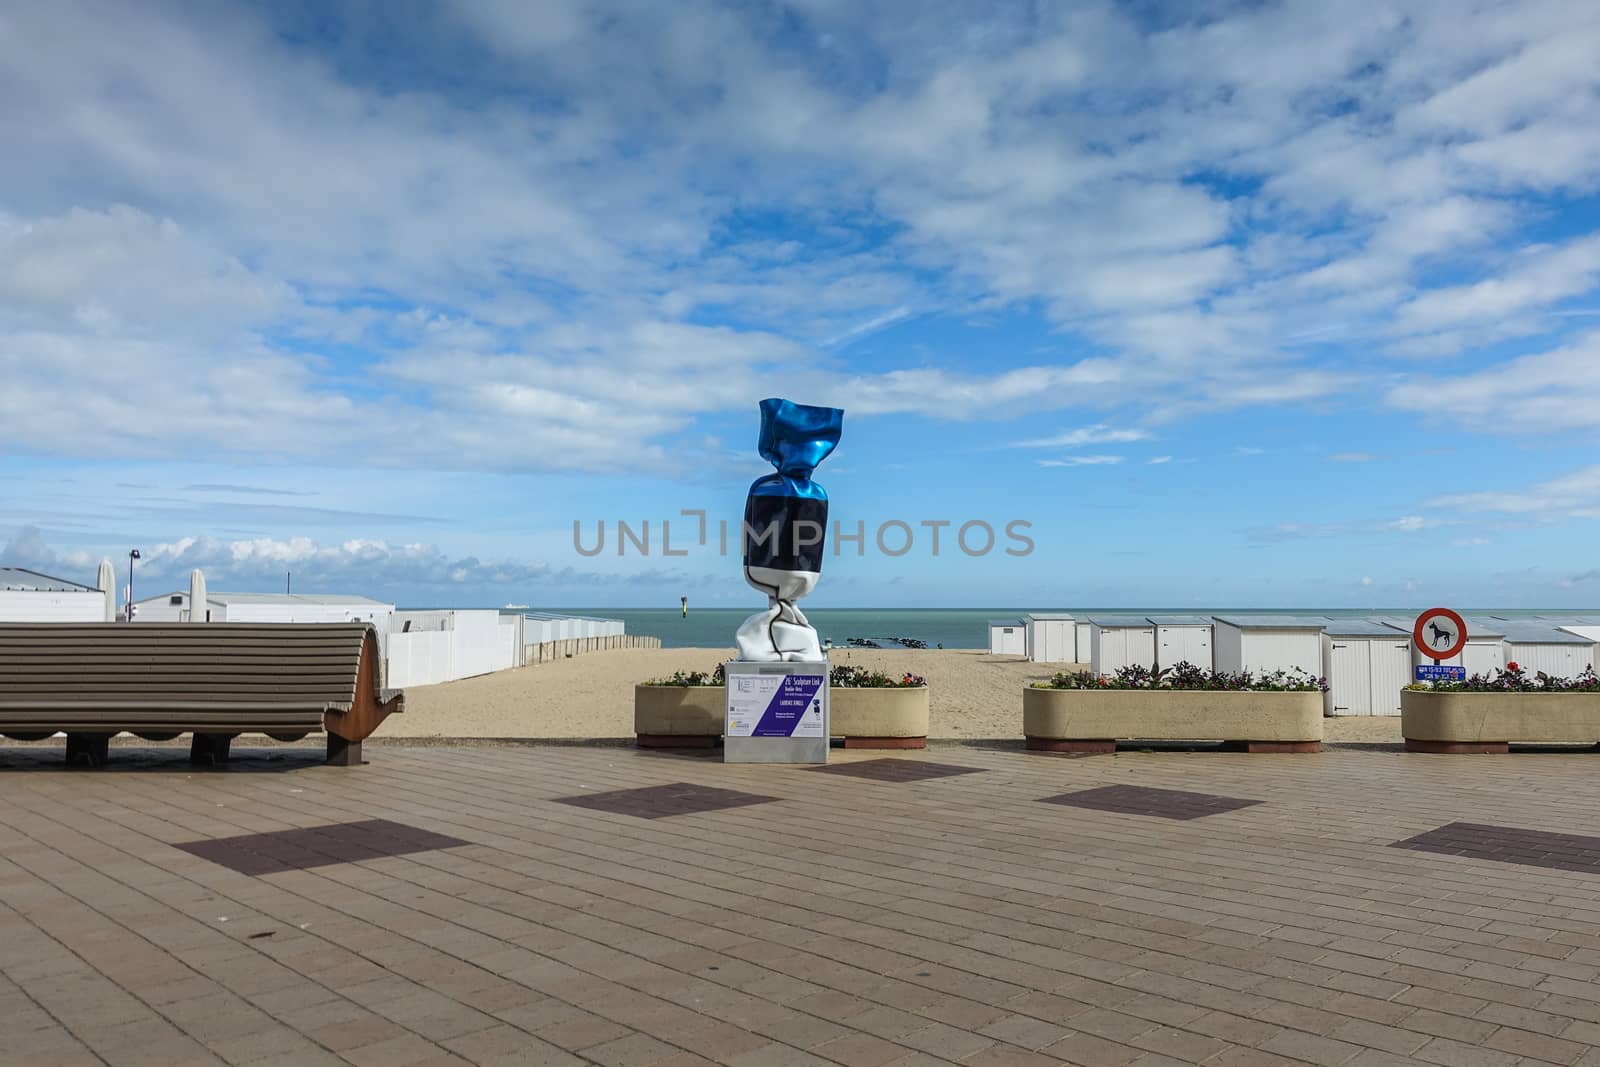 Knokke-Heist, Flanders, Belgium -  June 16, 2019: Knokke-Zoute part of town. Statue of wrapped candy standing on pedestal adjacent to beach. Rows of white cabins. Cloudscape.